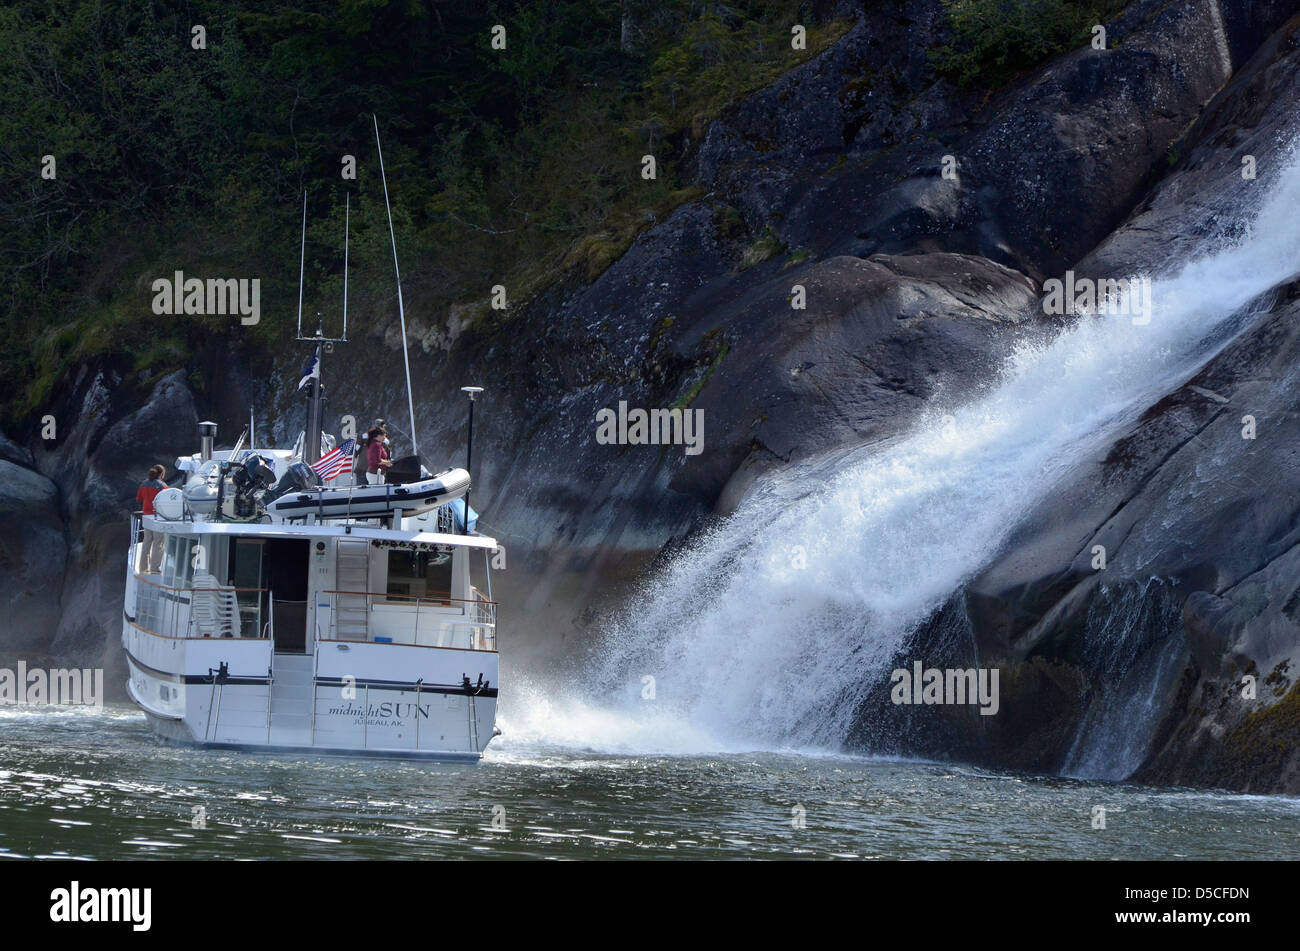 Tour boat by a waterfall in Tracy Arm. Tongass National Forest, Alaska. Stock Photo